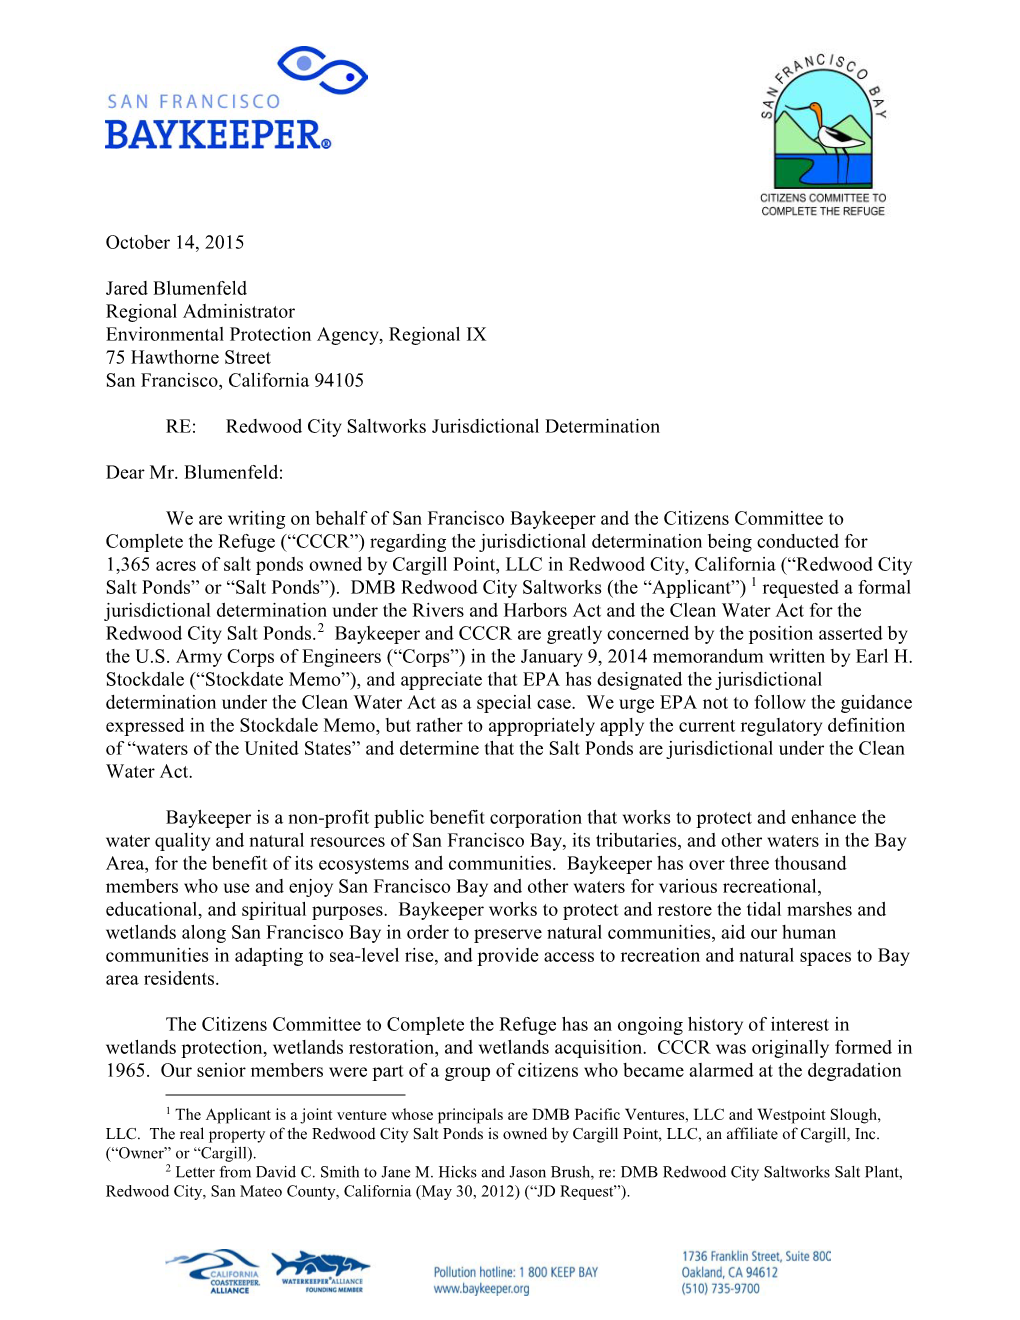 Read the Letter to the EPA from Baykeeper and Citizens Committee